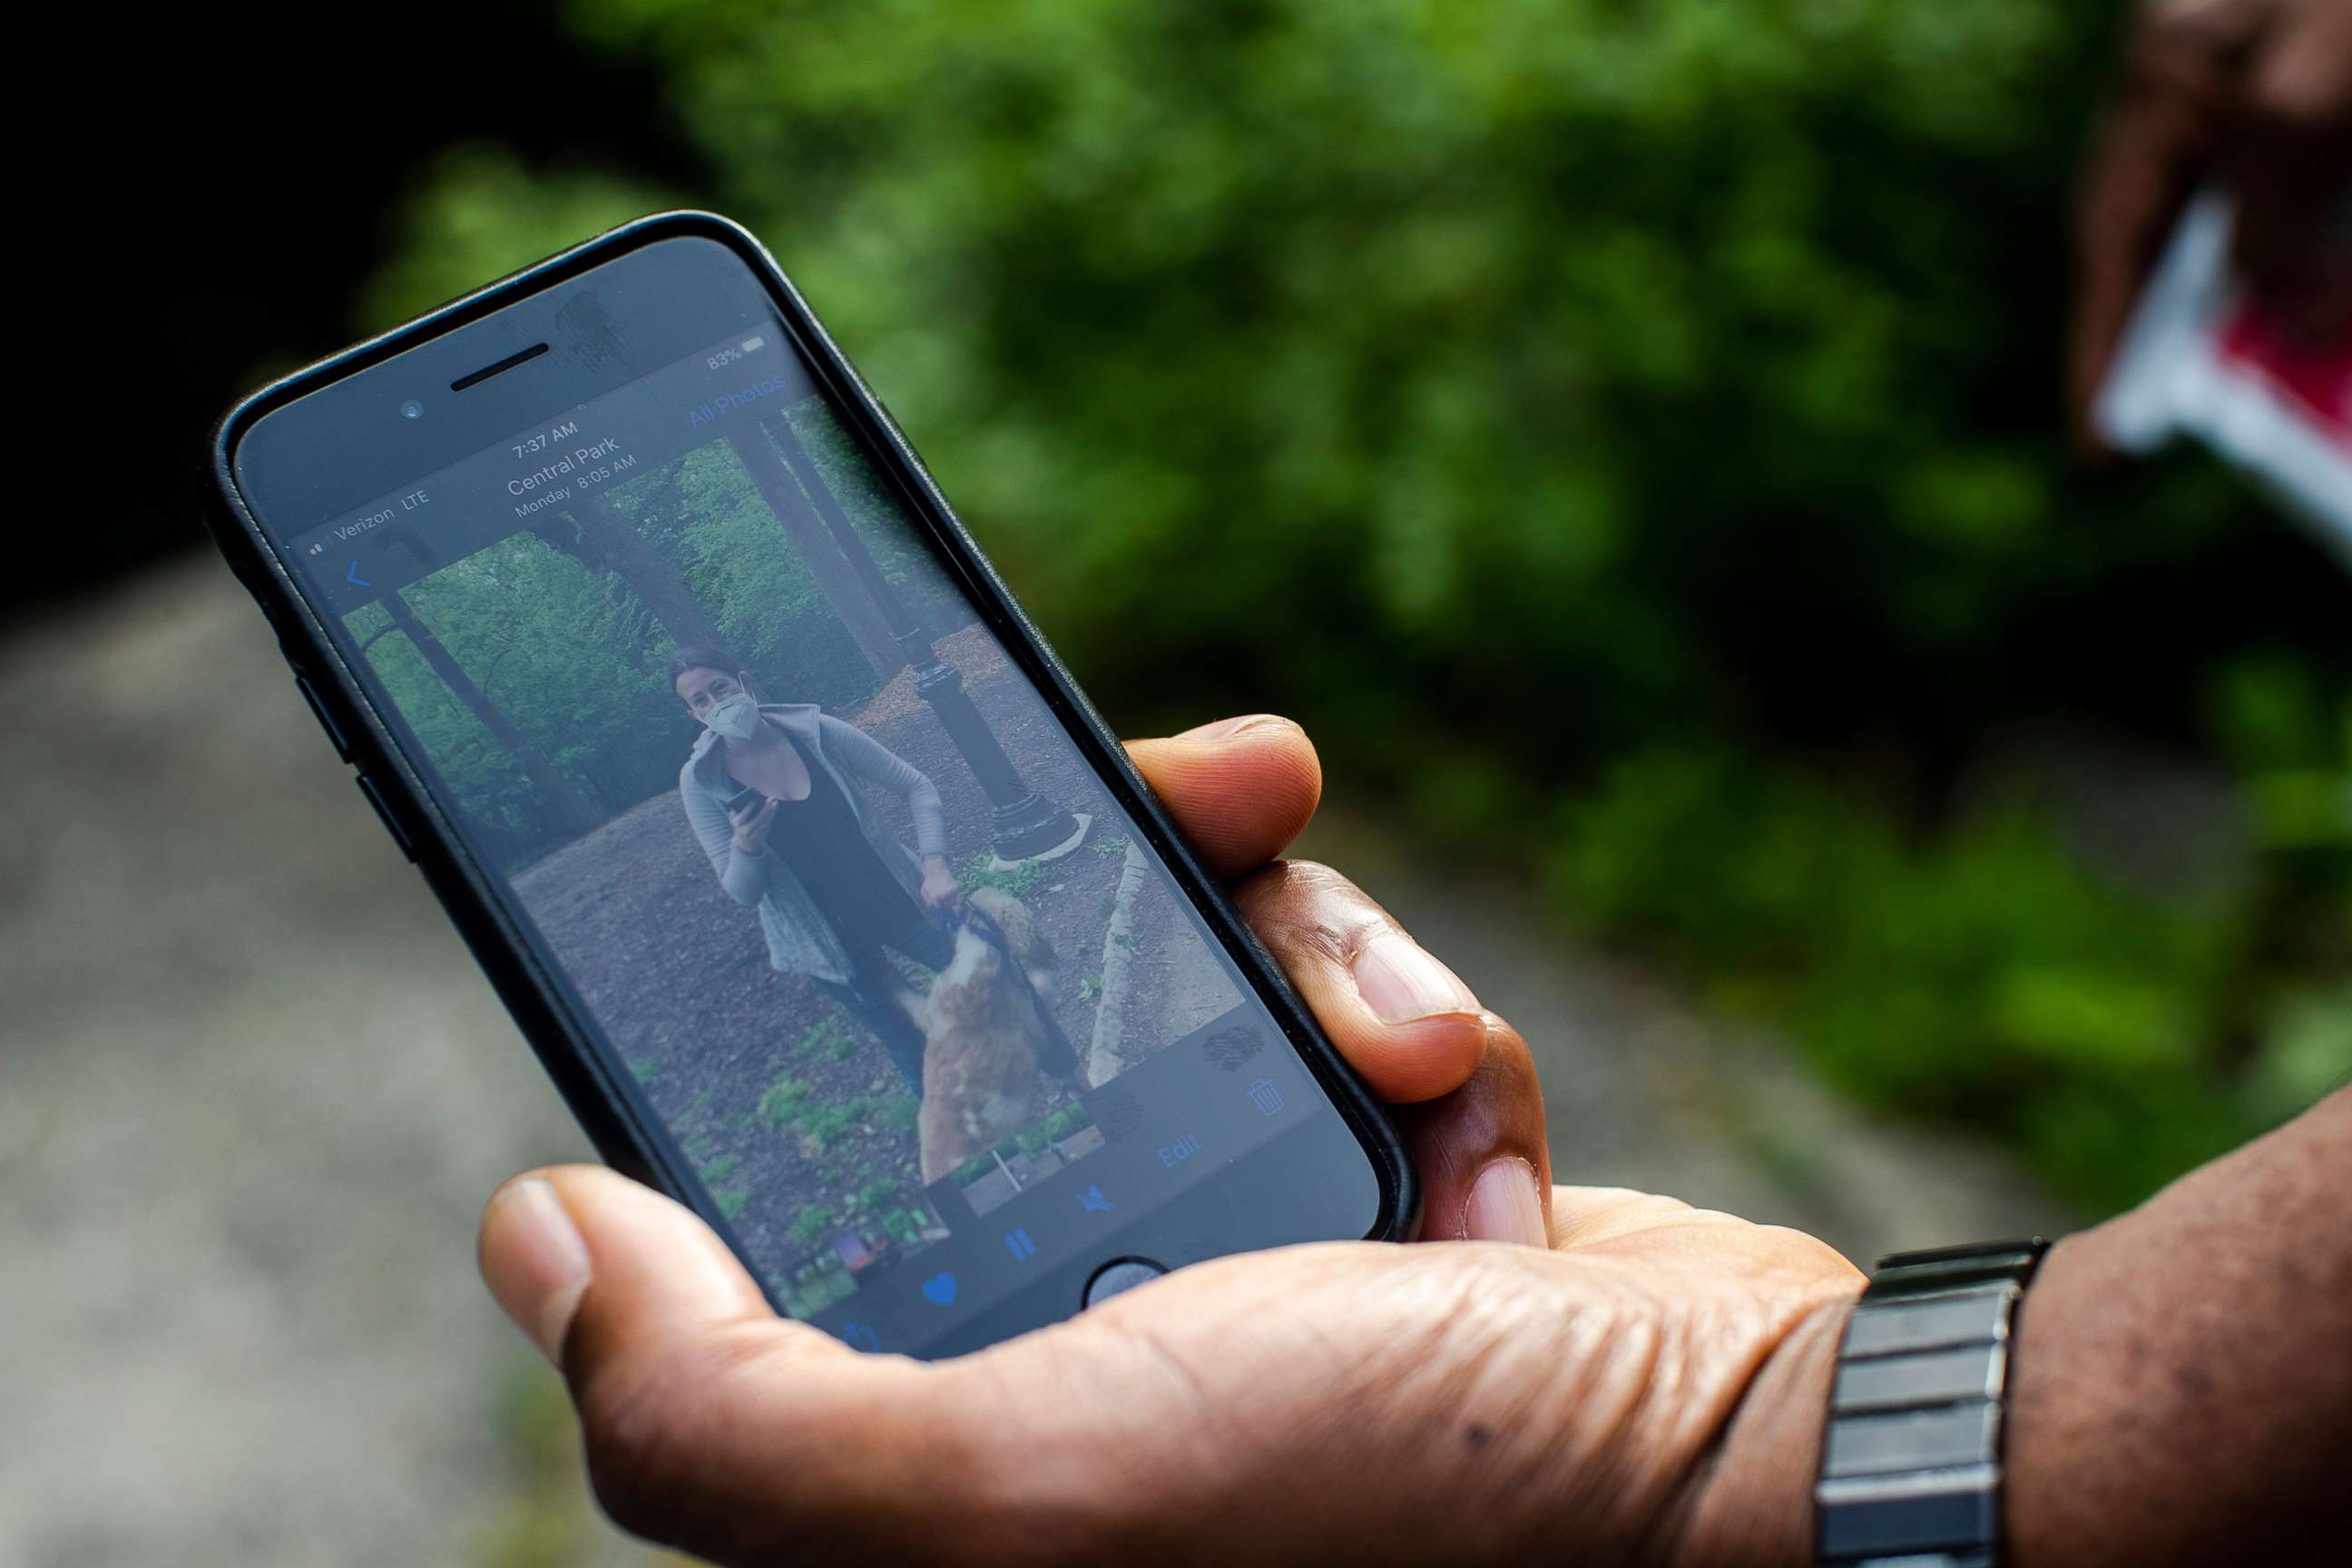 PHOTO: Christian Cooper displays a video recording of Amy Cooper on his smartphone in New York's Central Park on May 27, 2020.